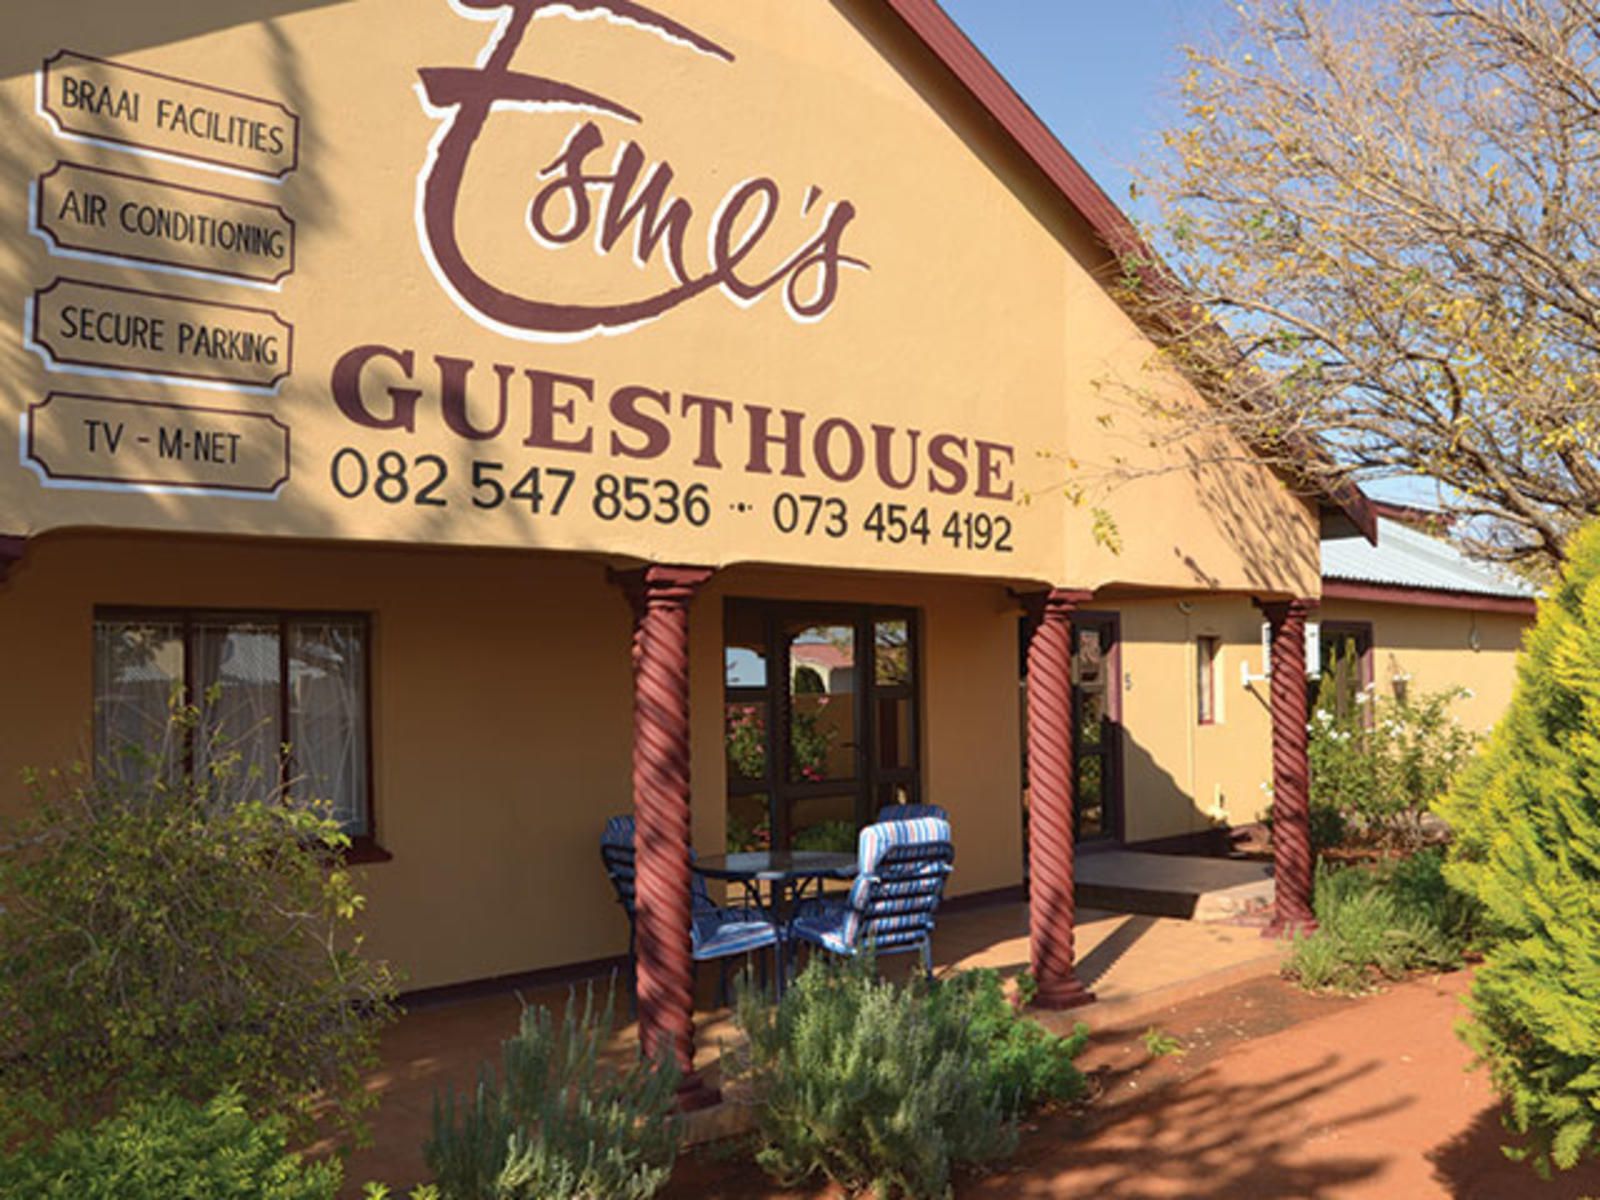 Esme S Guest House Keidebees Upington Northern Cape South Africa House, Building, Architecture, Sign